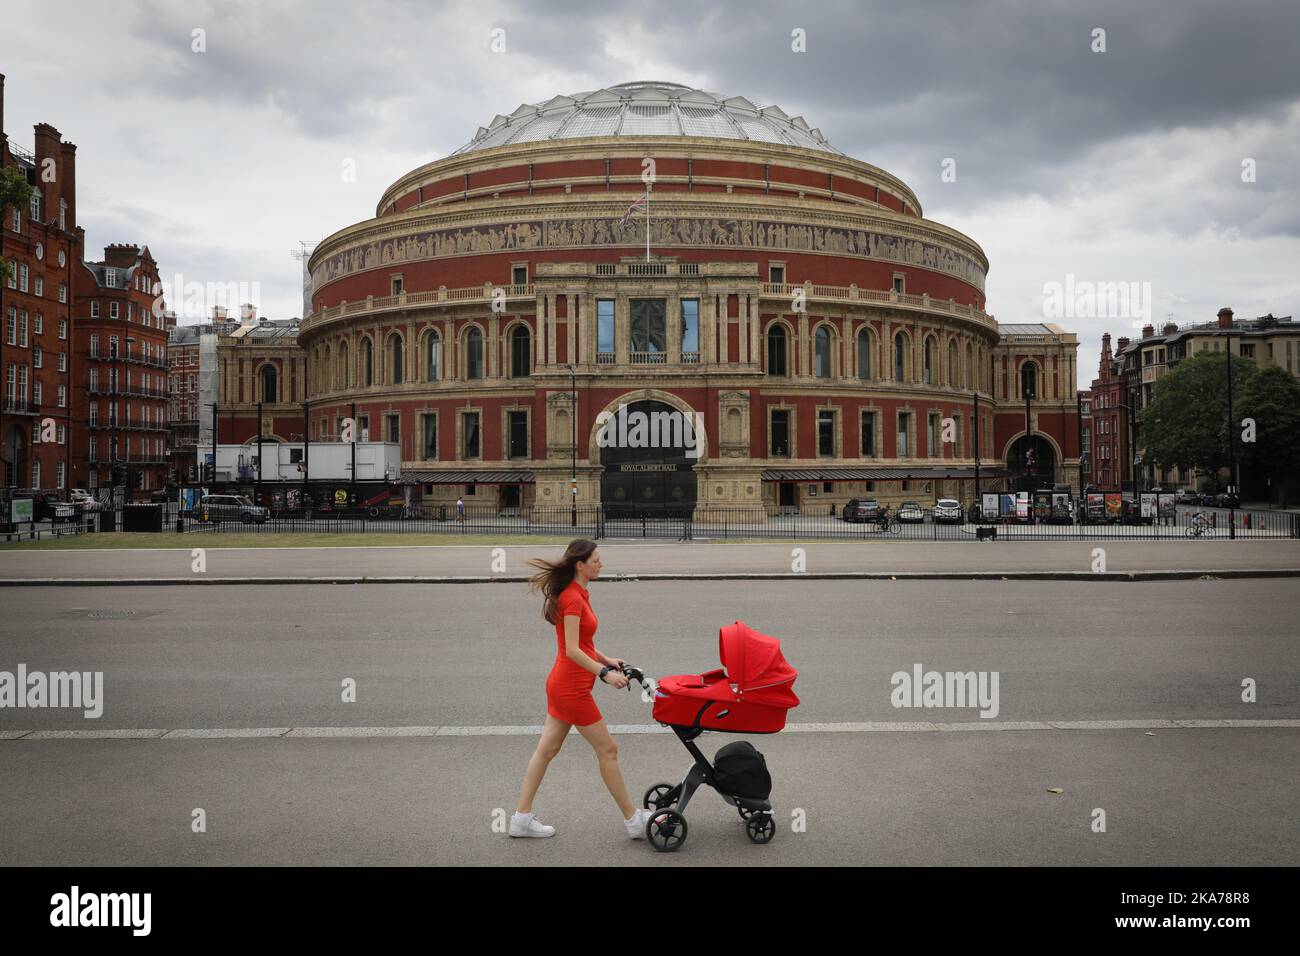 (200708) -- BEIJING, July 8, 2020 (Xinhua) -- A woman walks past the Royal Albert Hall in London, Britain, on July 7, 2020. Britain's arts, culture and heritage industries will receive a 1.57-billion-pound (1.96-billion-U.S. dollar) rescue package to help weather the impact of the coronavirus pandemic, the government has announced. (Photo by Tim Ireland/Xinhua) Stock Photo